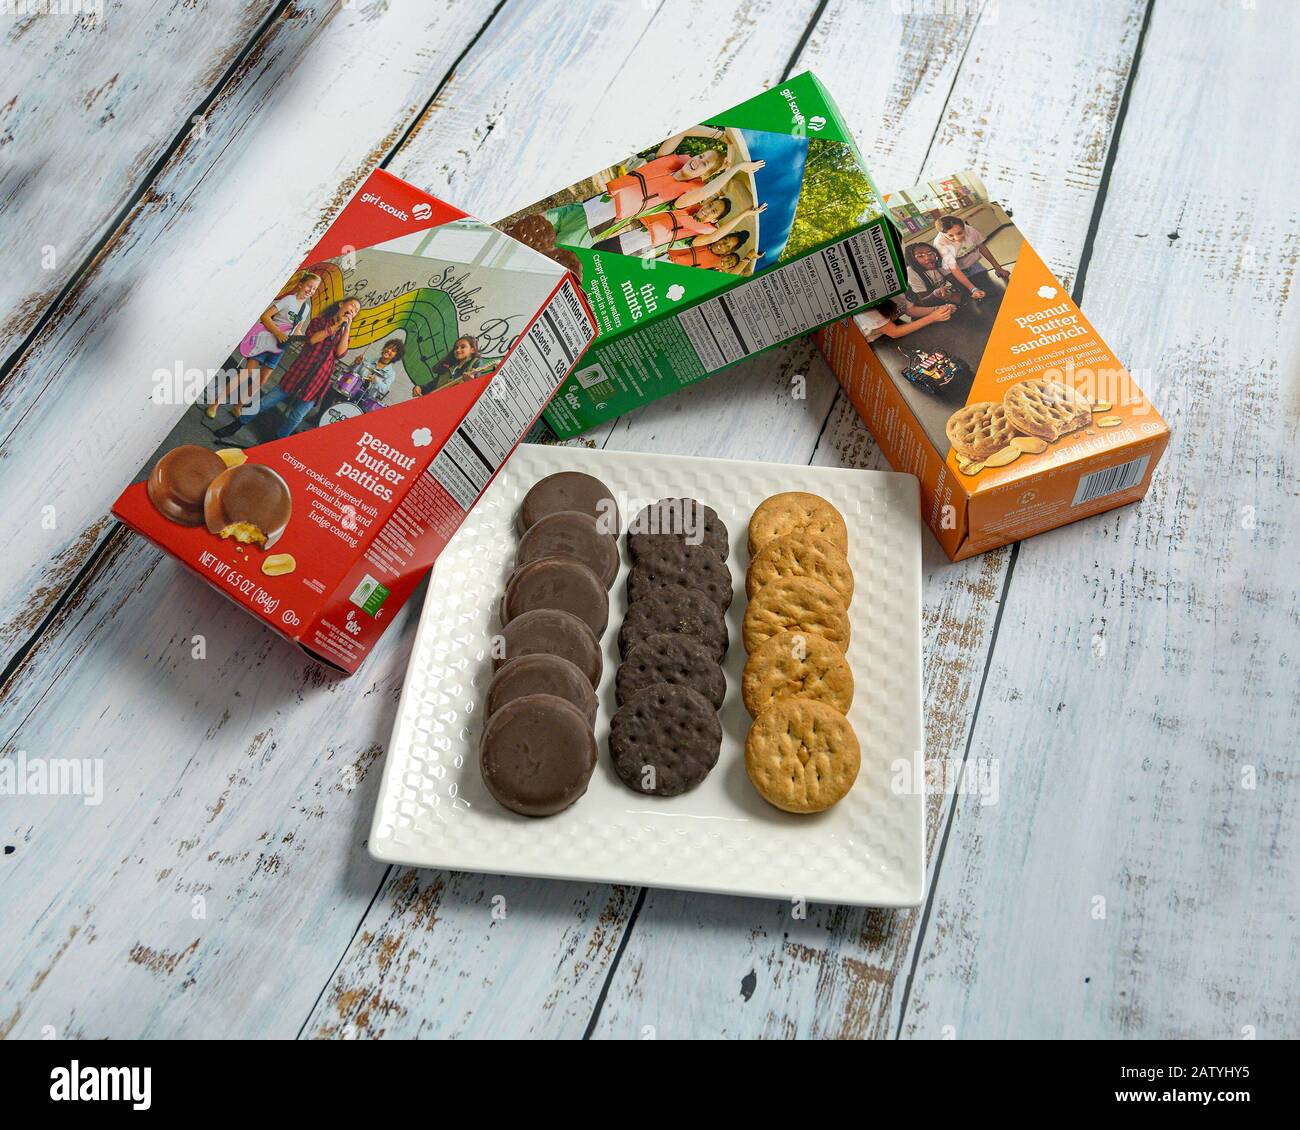 Girl scout cookies Stock Photo